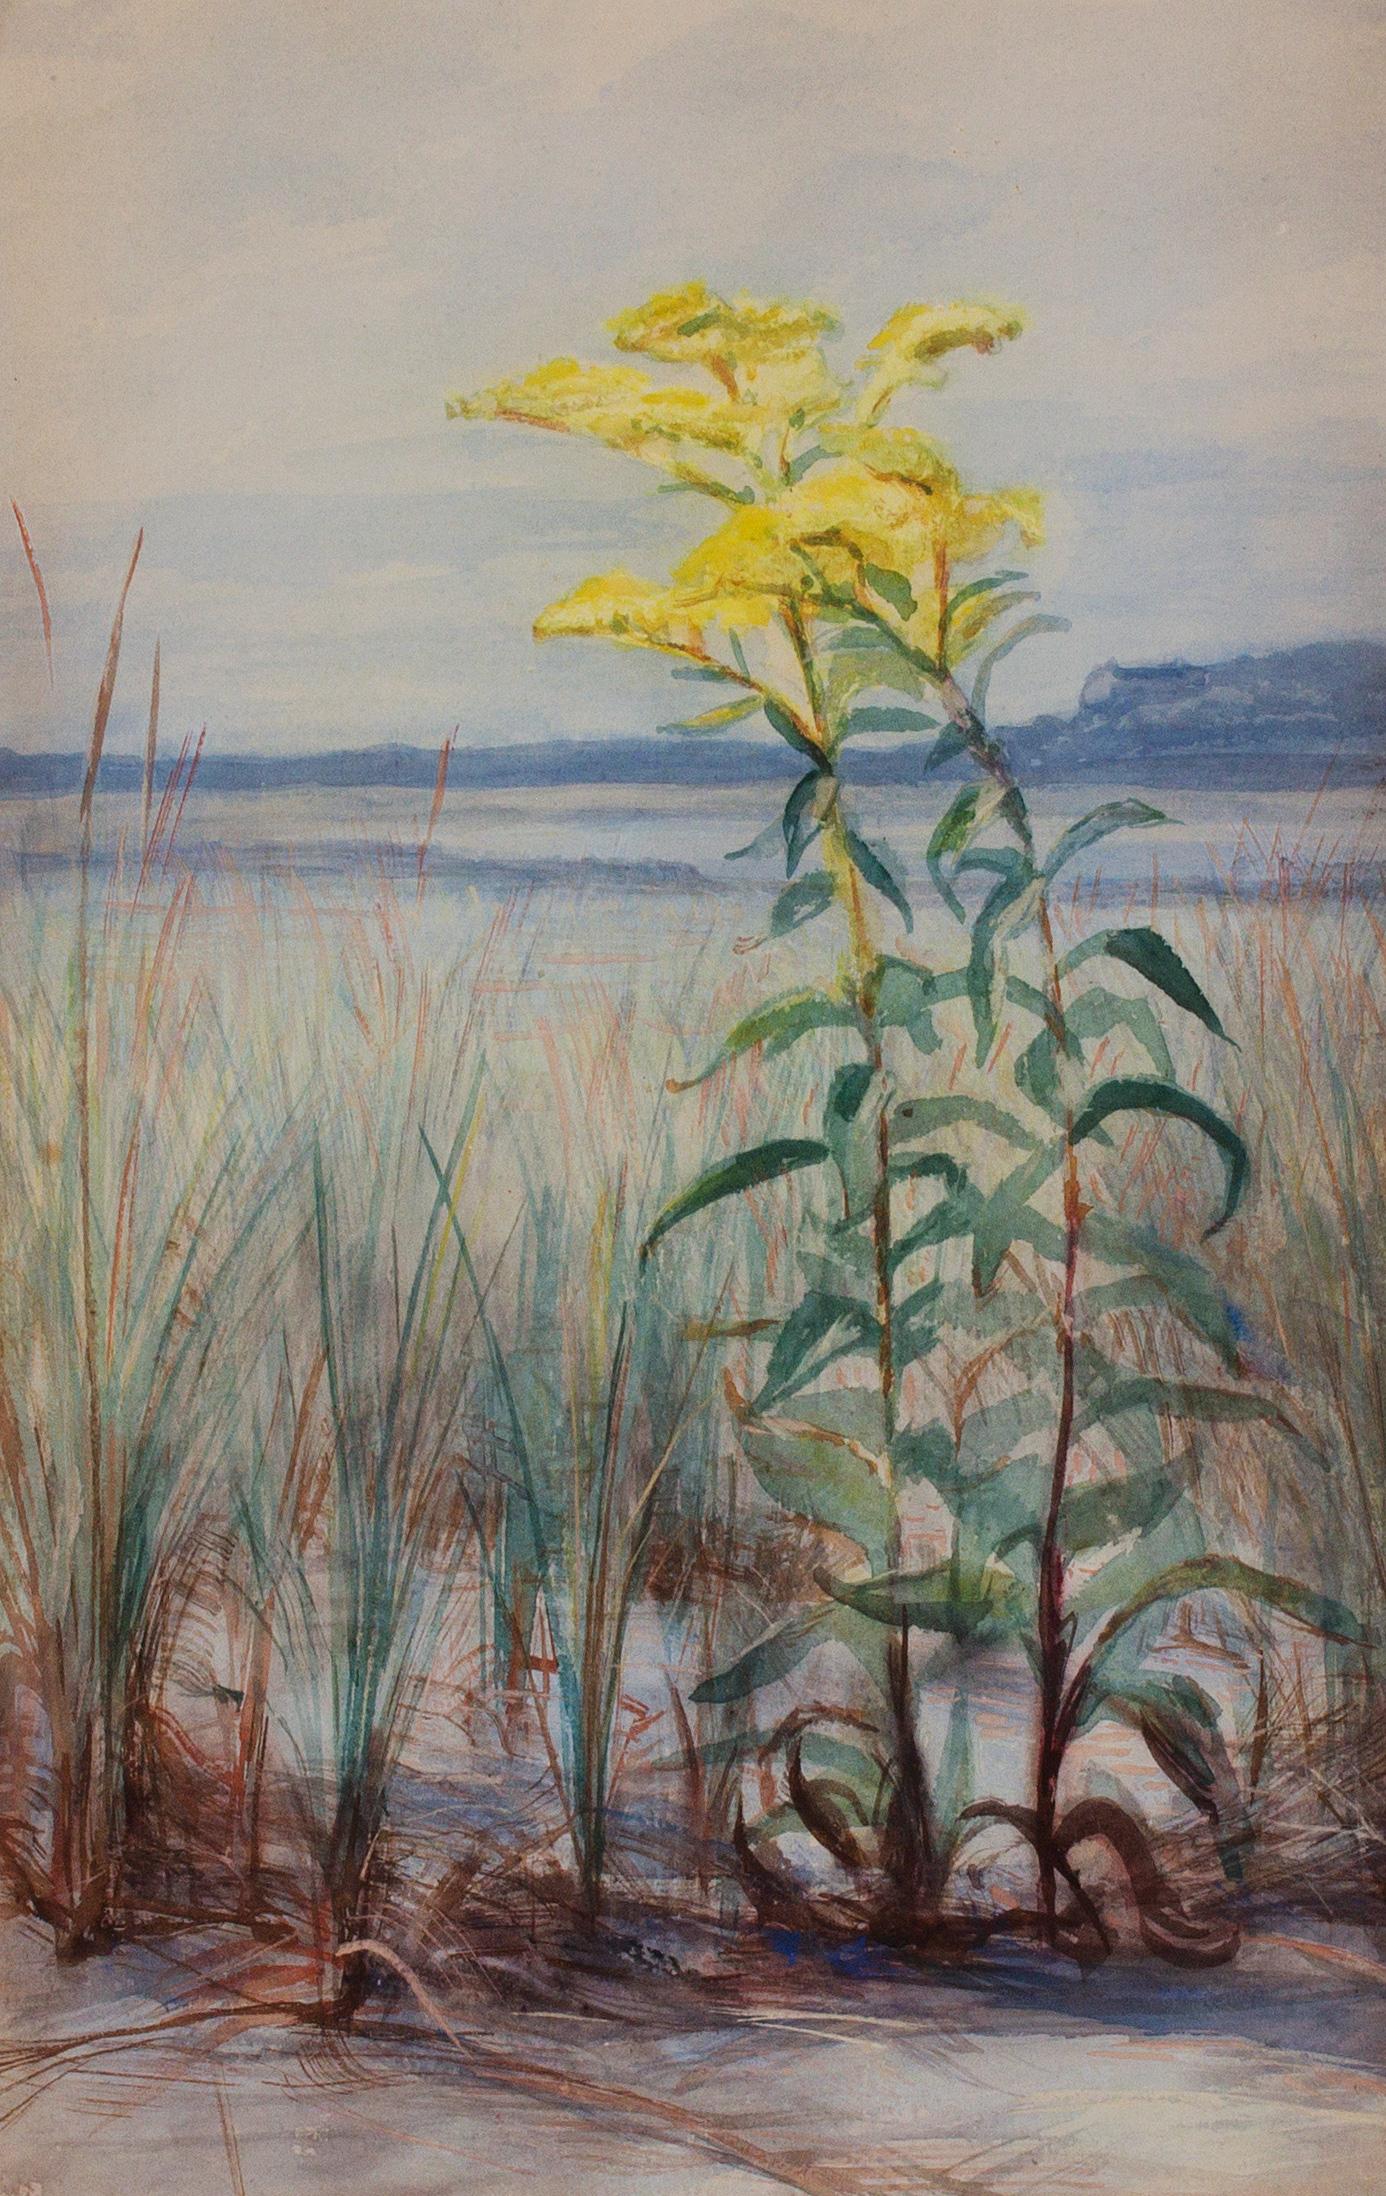 George Cochran Lambdin
(American, 1830–1896)
Goldenrod in the Sand
Watercolor on paper, 19 x 12 inches
Framed: 27 x 20 inches (approx.)

A son of the portraitist James Reid Lambdin, George Cochran Lambdin was born in Pittsburgh and moved to